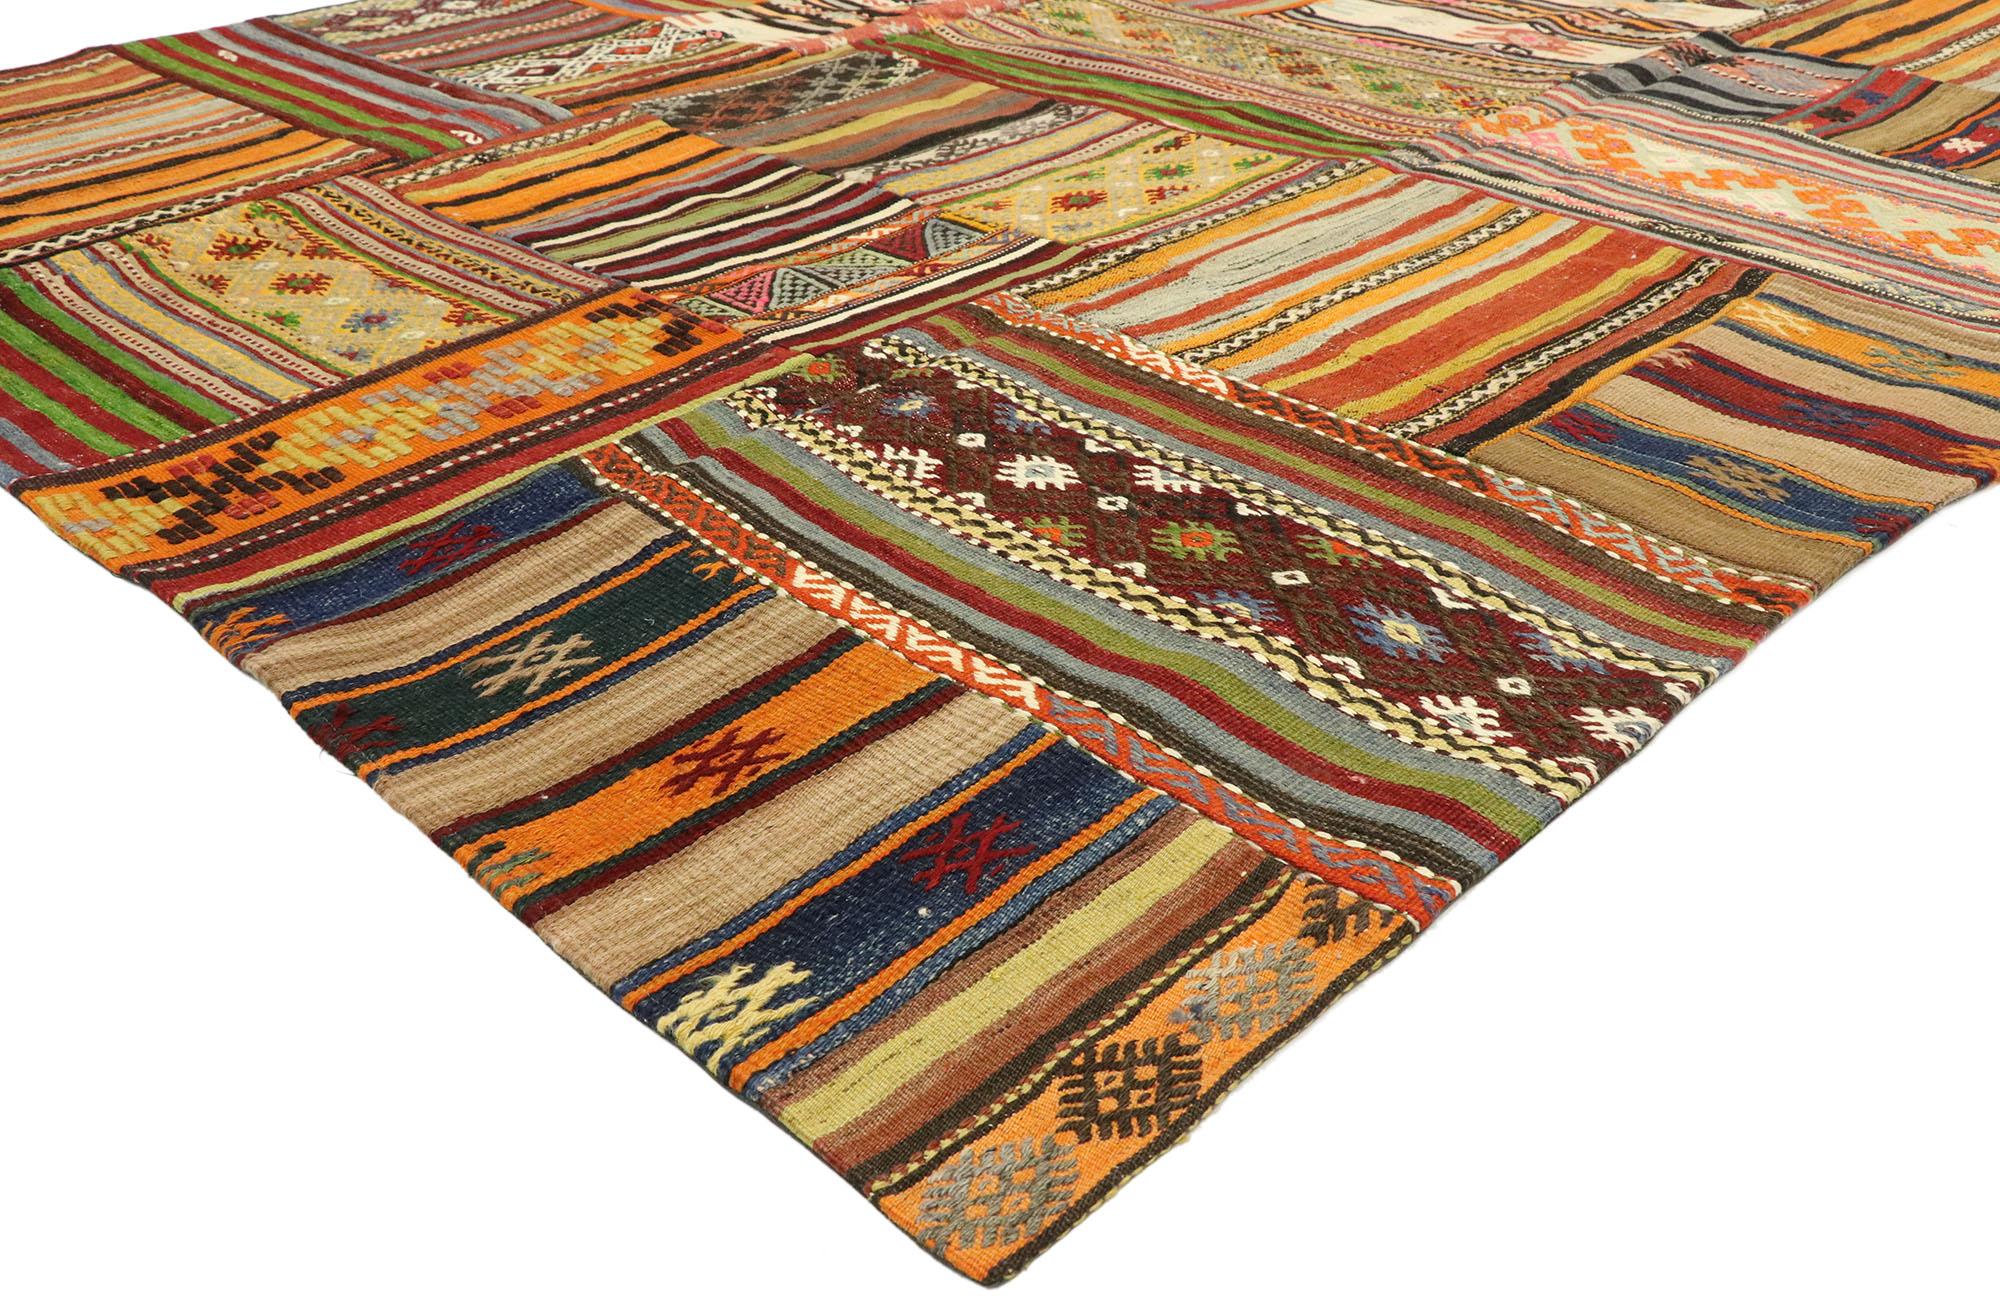 74242, vintage Turkish Patchwork Kilim Plaid rug with Preppy Madras style. Warm and welcoming, conjure the feeling of modern rustic charm with this handwoven wool vintage Turkish tartan plaid madras area rug. Masculine prep combined with timeless